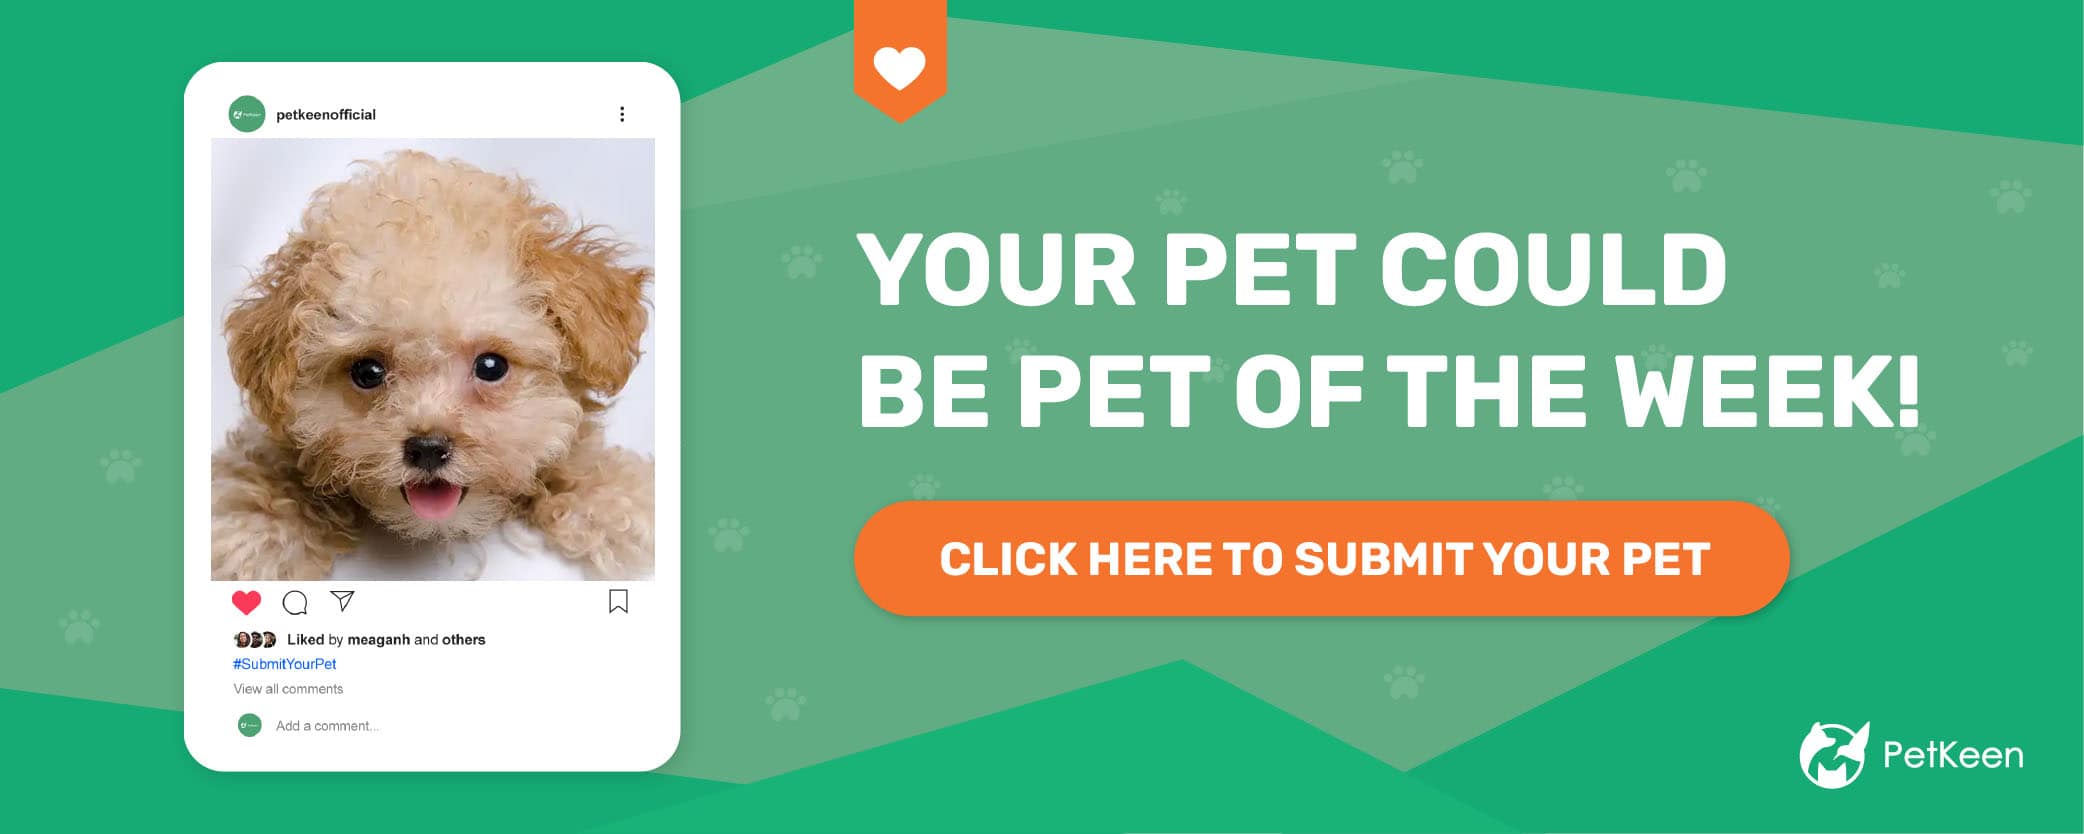 submit a pet pk dog